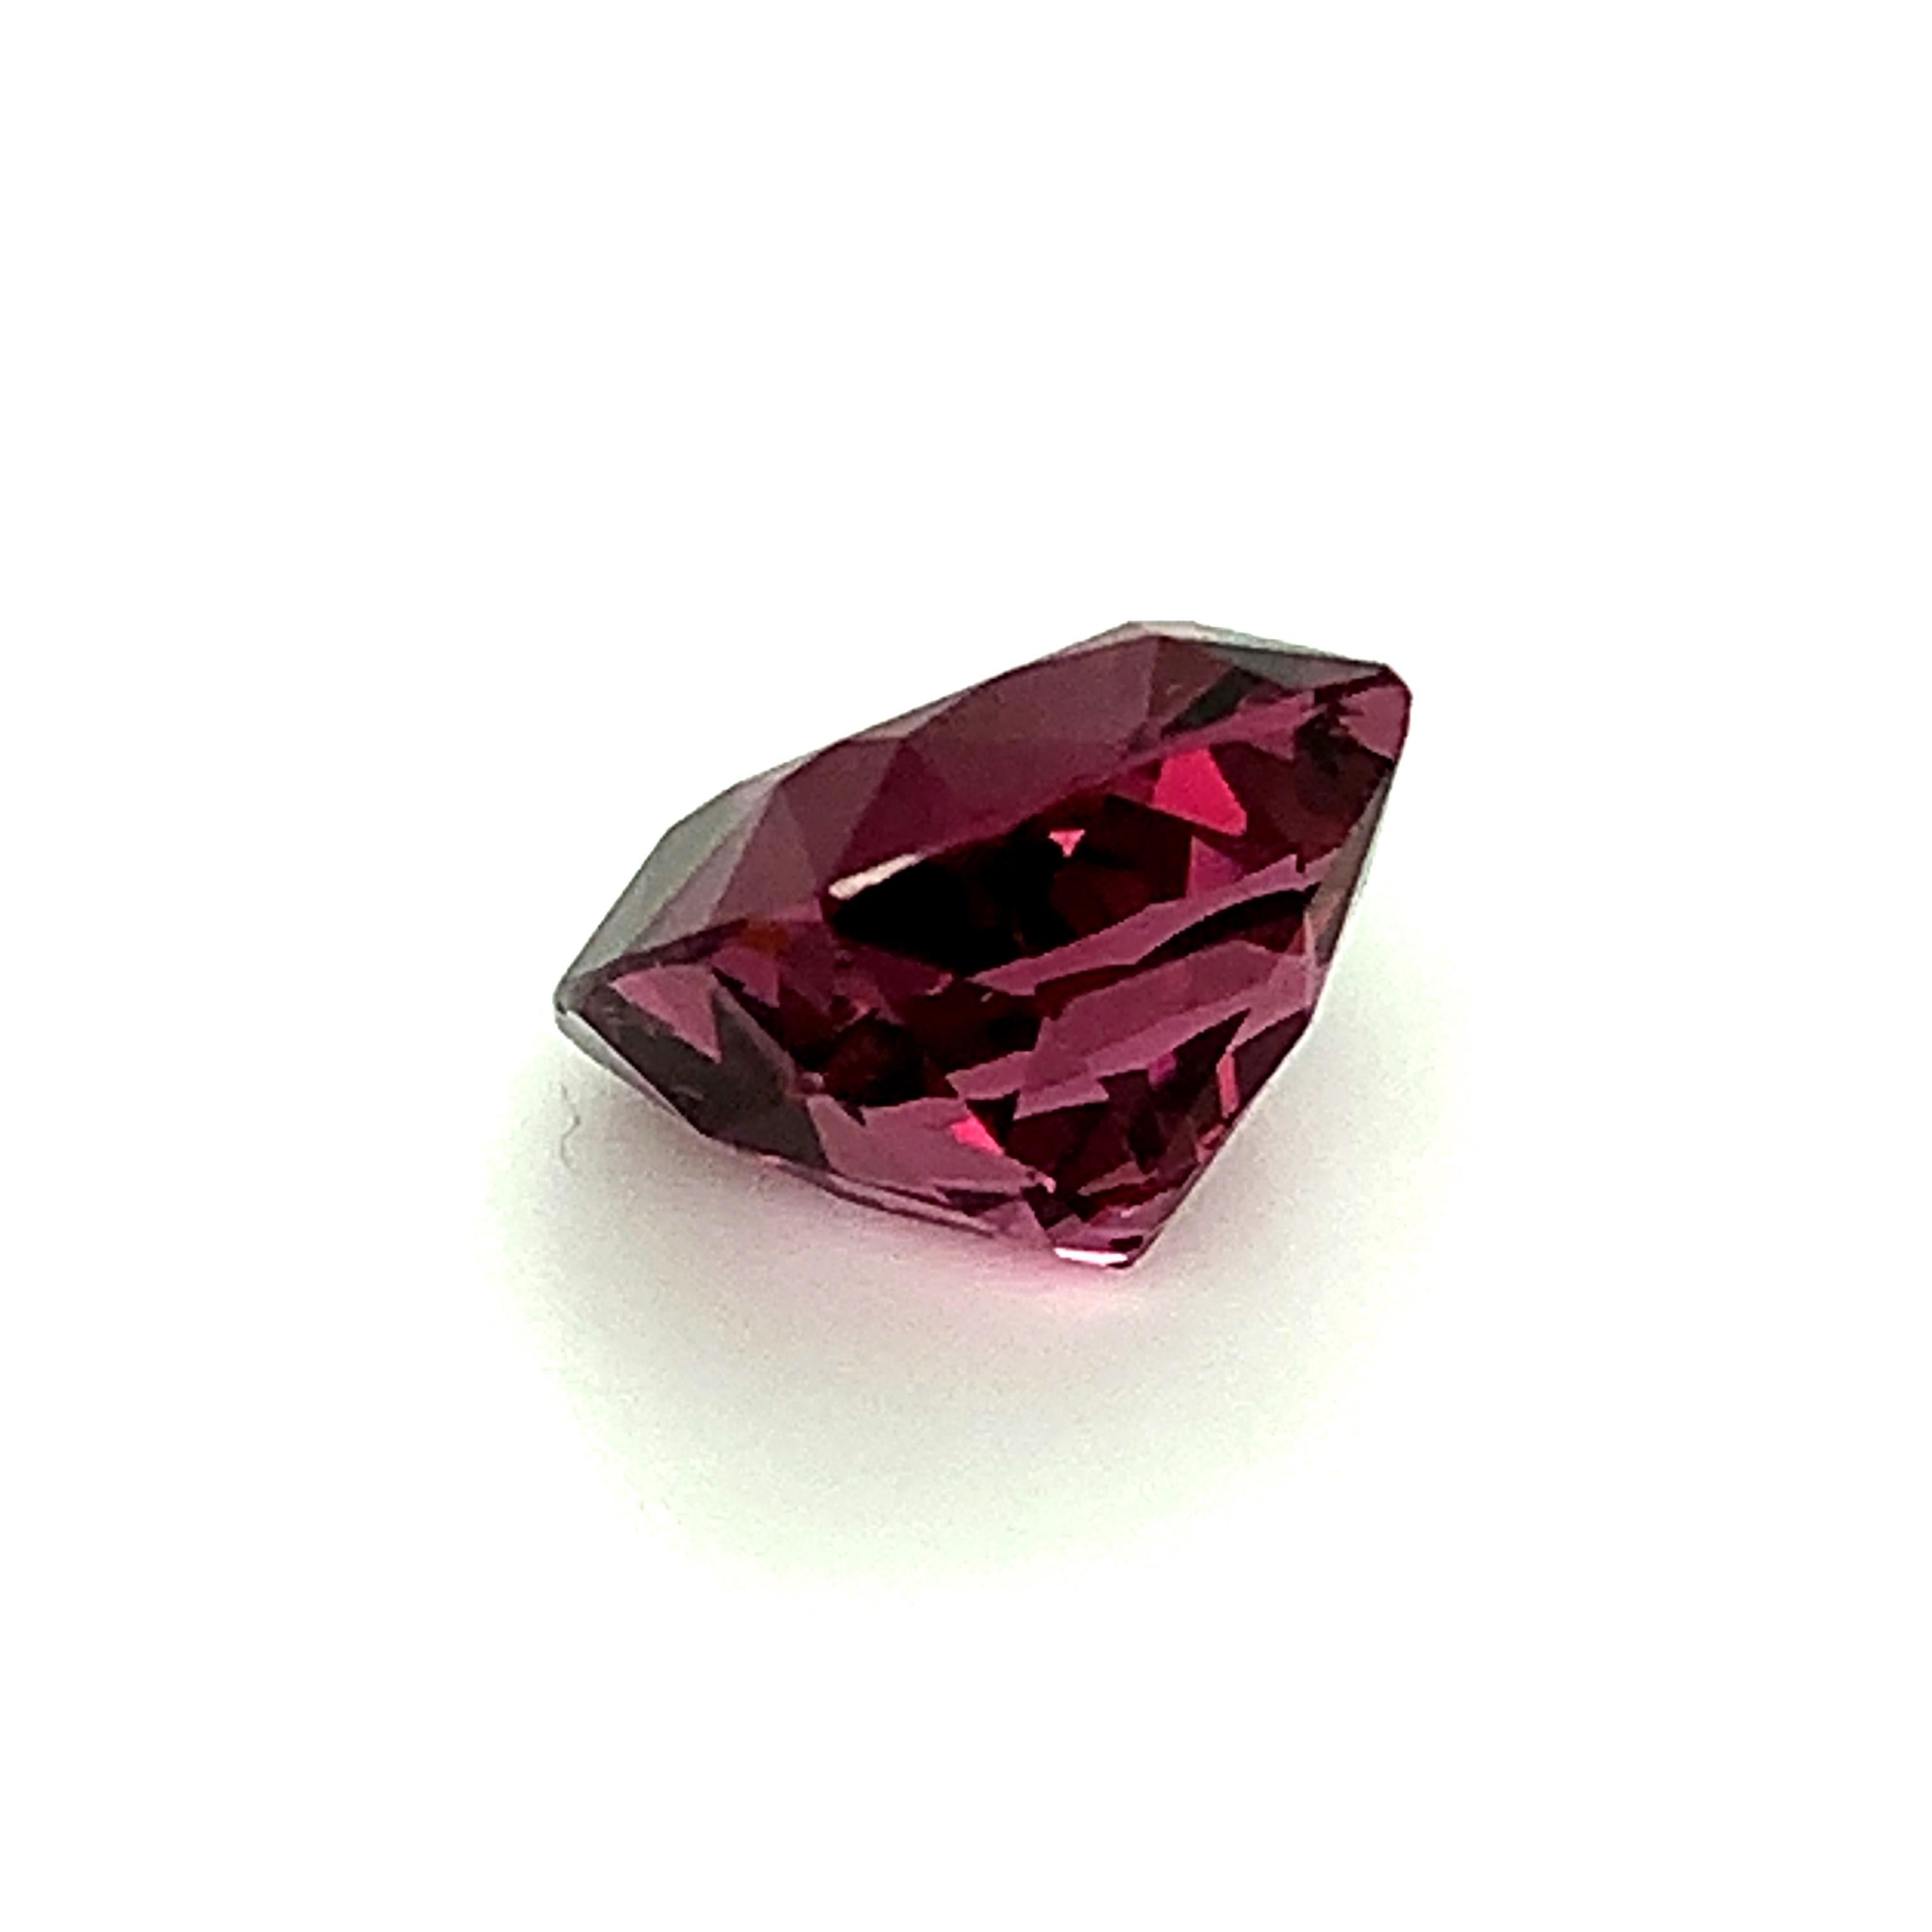 Unheated 9.26 Carat Purple Pink Spinel Cushion, Loose Gemstone, GIA Certified .A For Sale 1